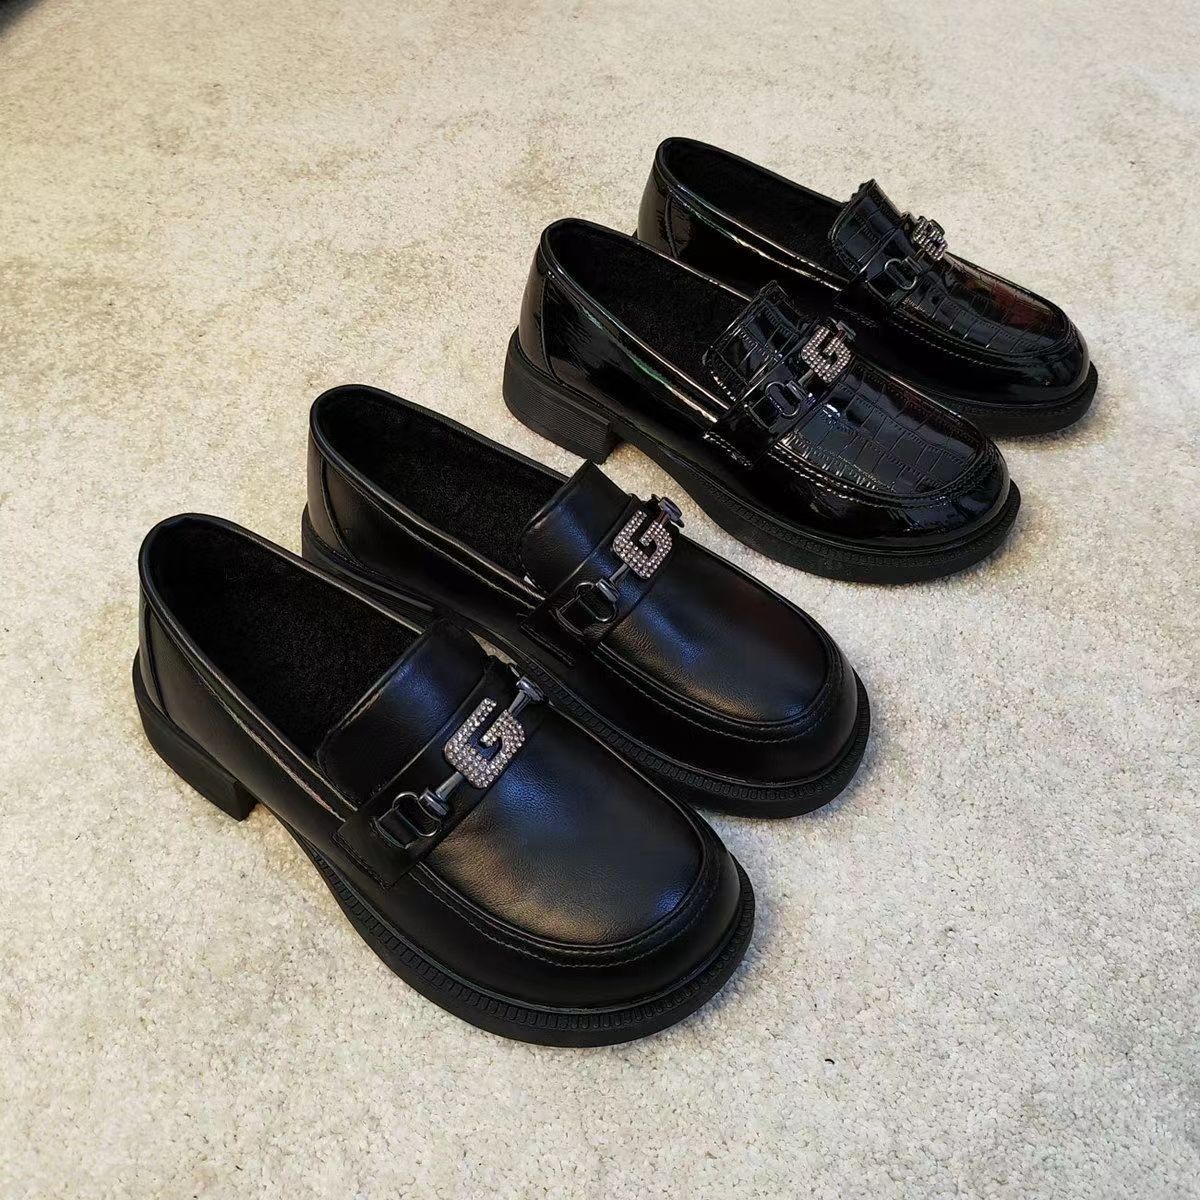 Black Loafers New Style Versatile Slip-on British Style Small Leather Shoes Thick Heel Soft Sole Shoes